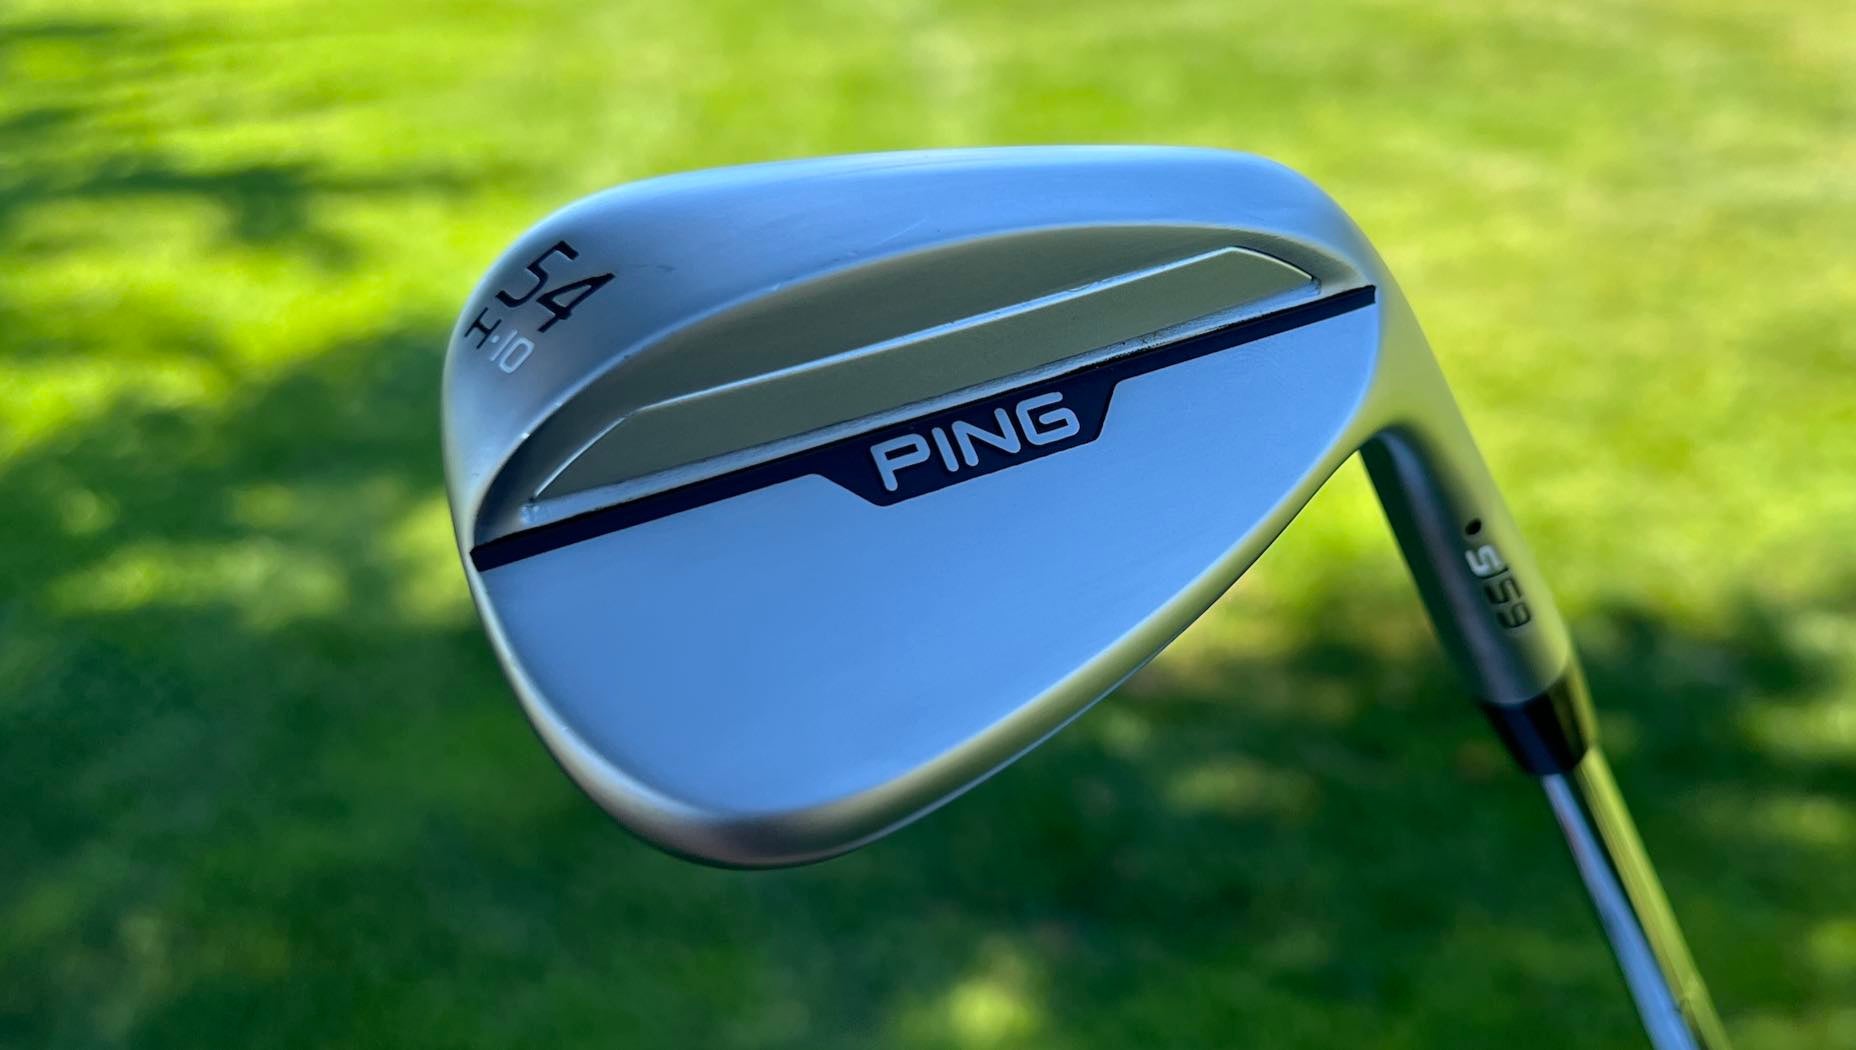 PIng S159 wedges fitting app